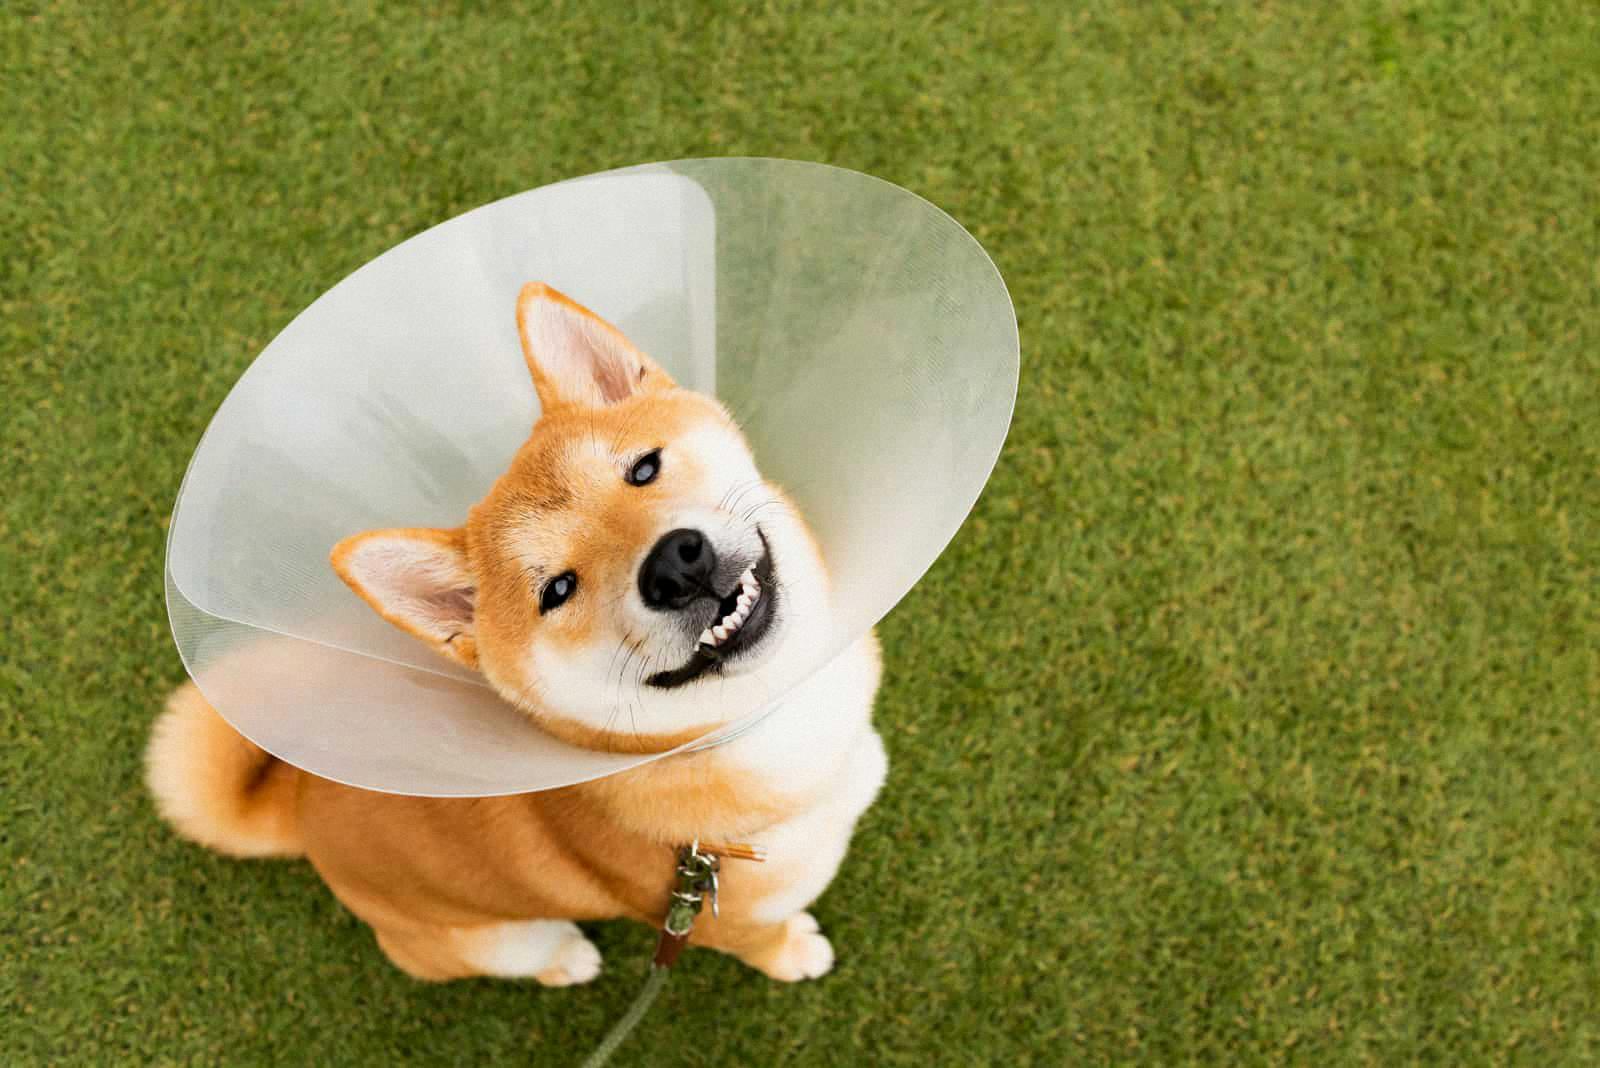 when to take cone off dog after neuter